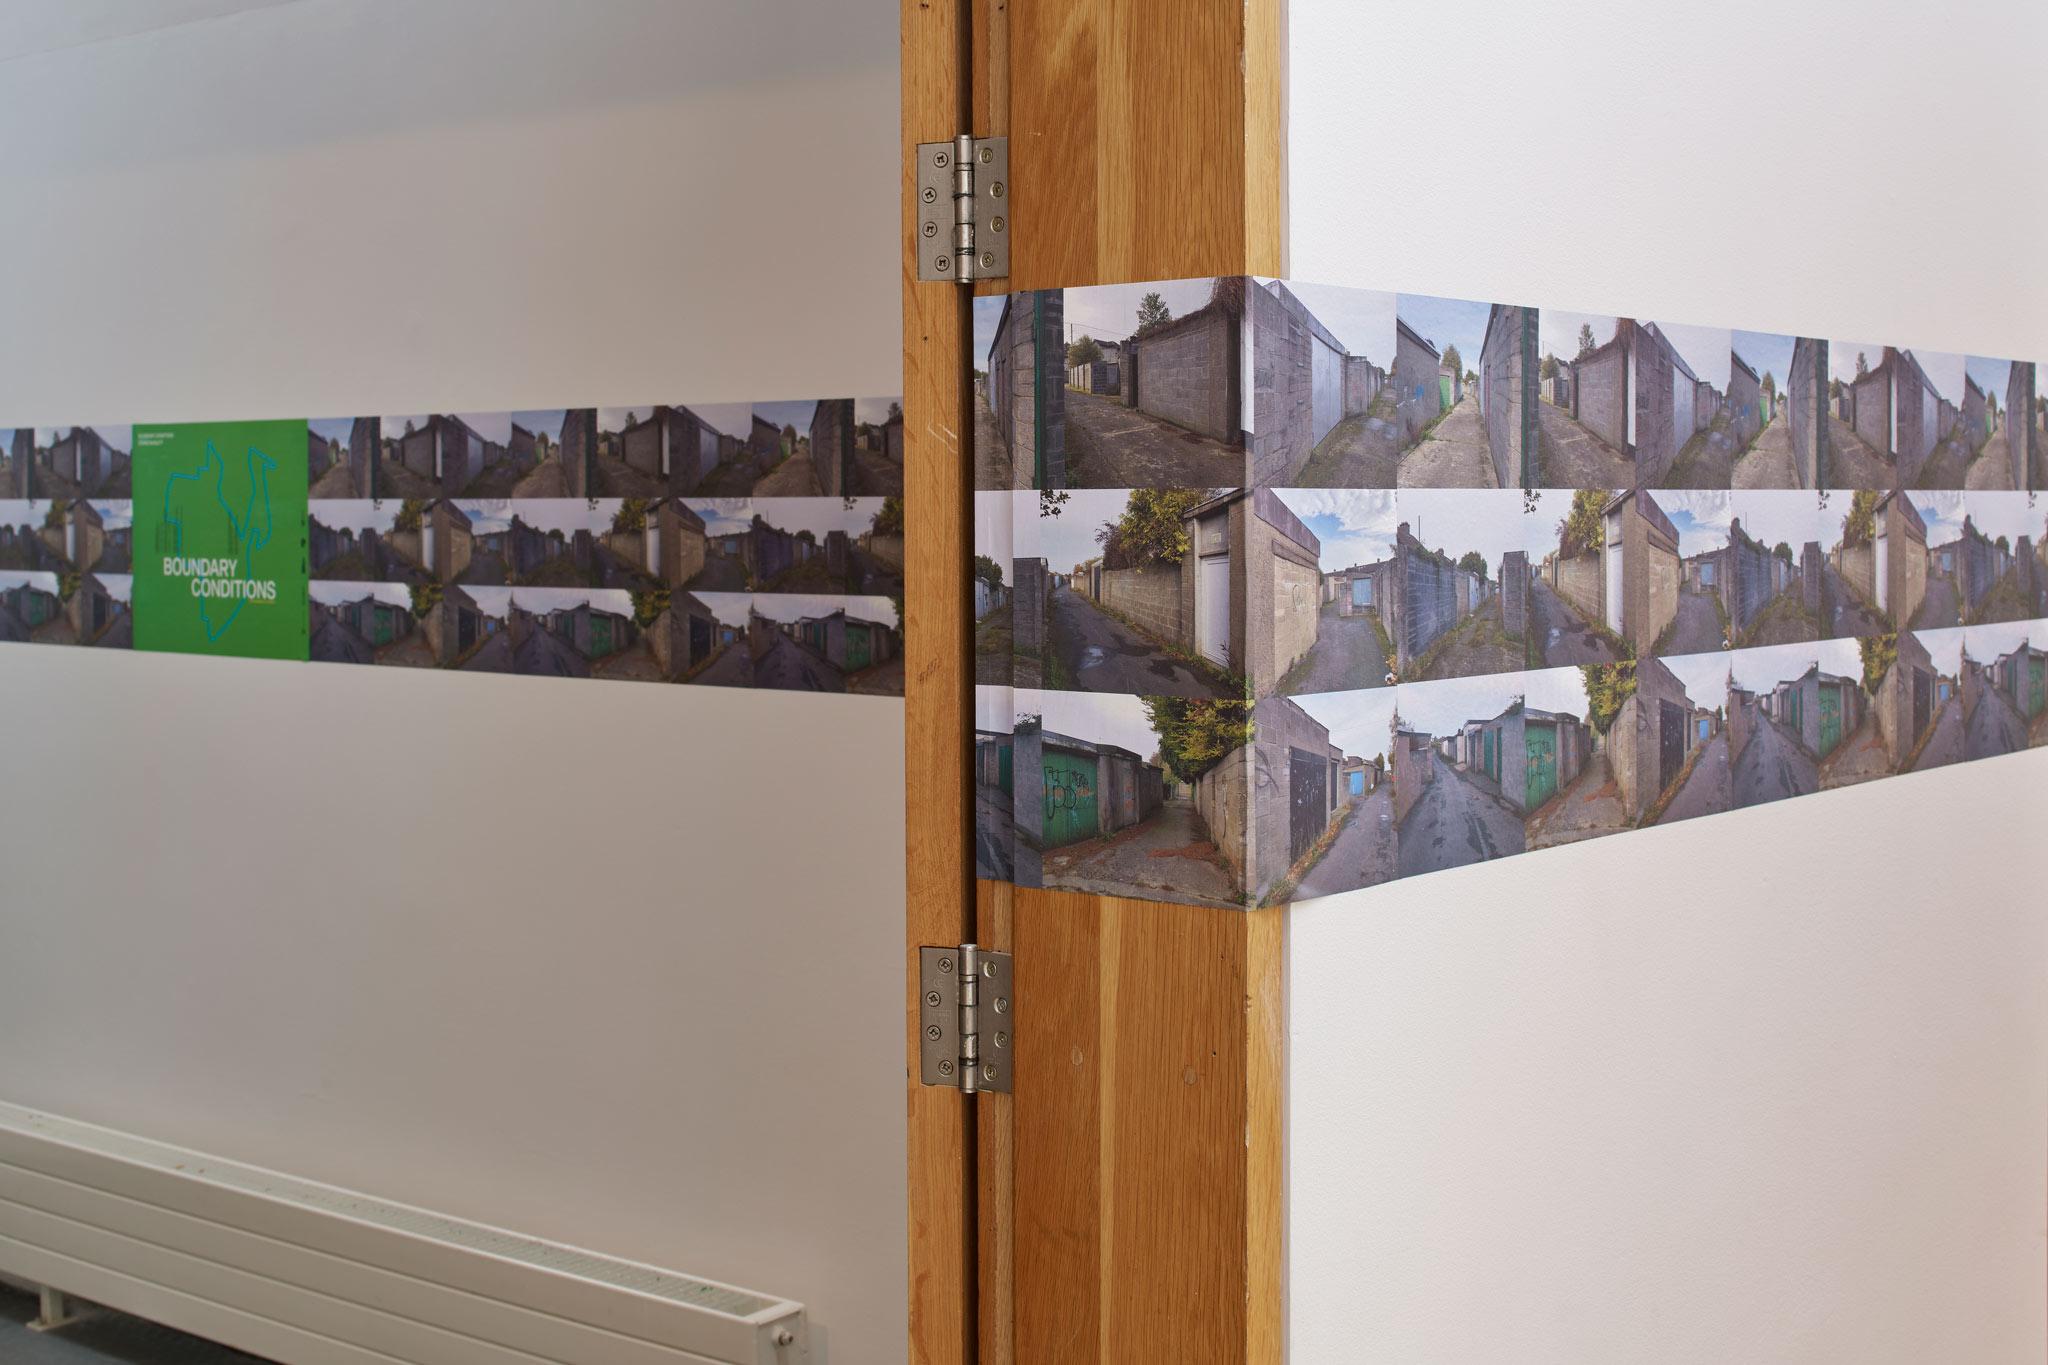 images wrapping around the walls and door frame of a gallery space